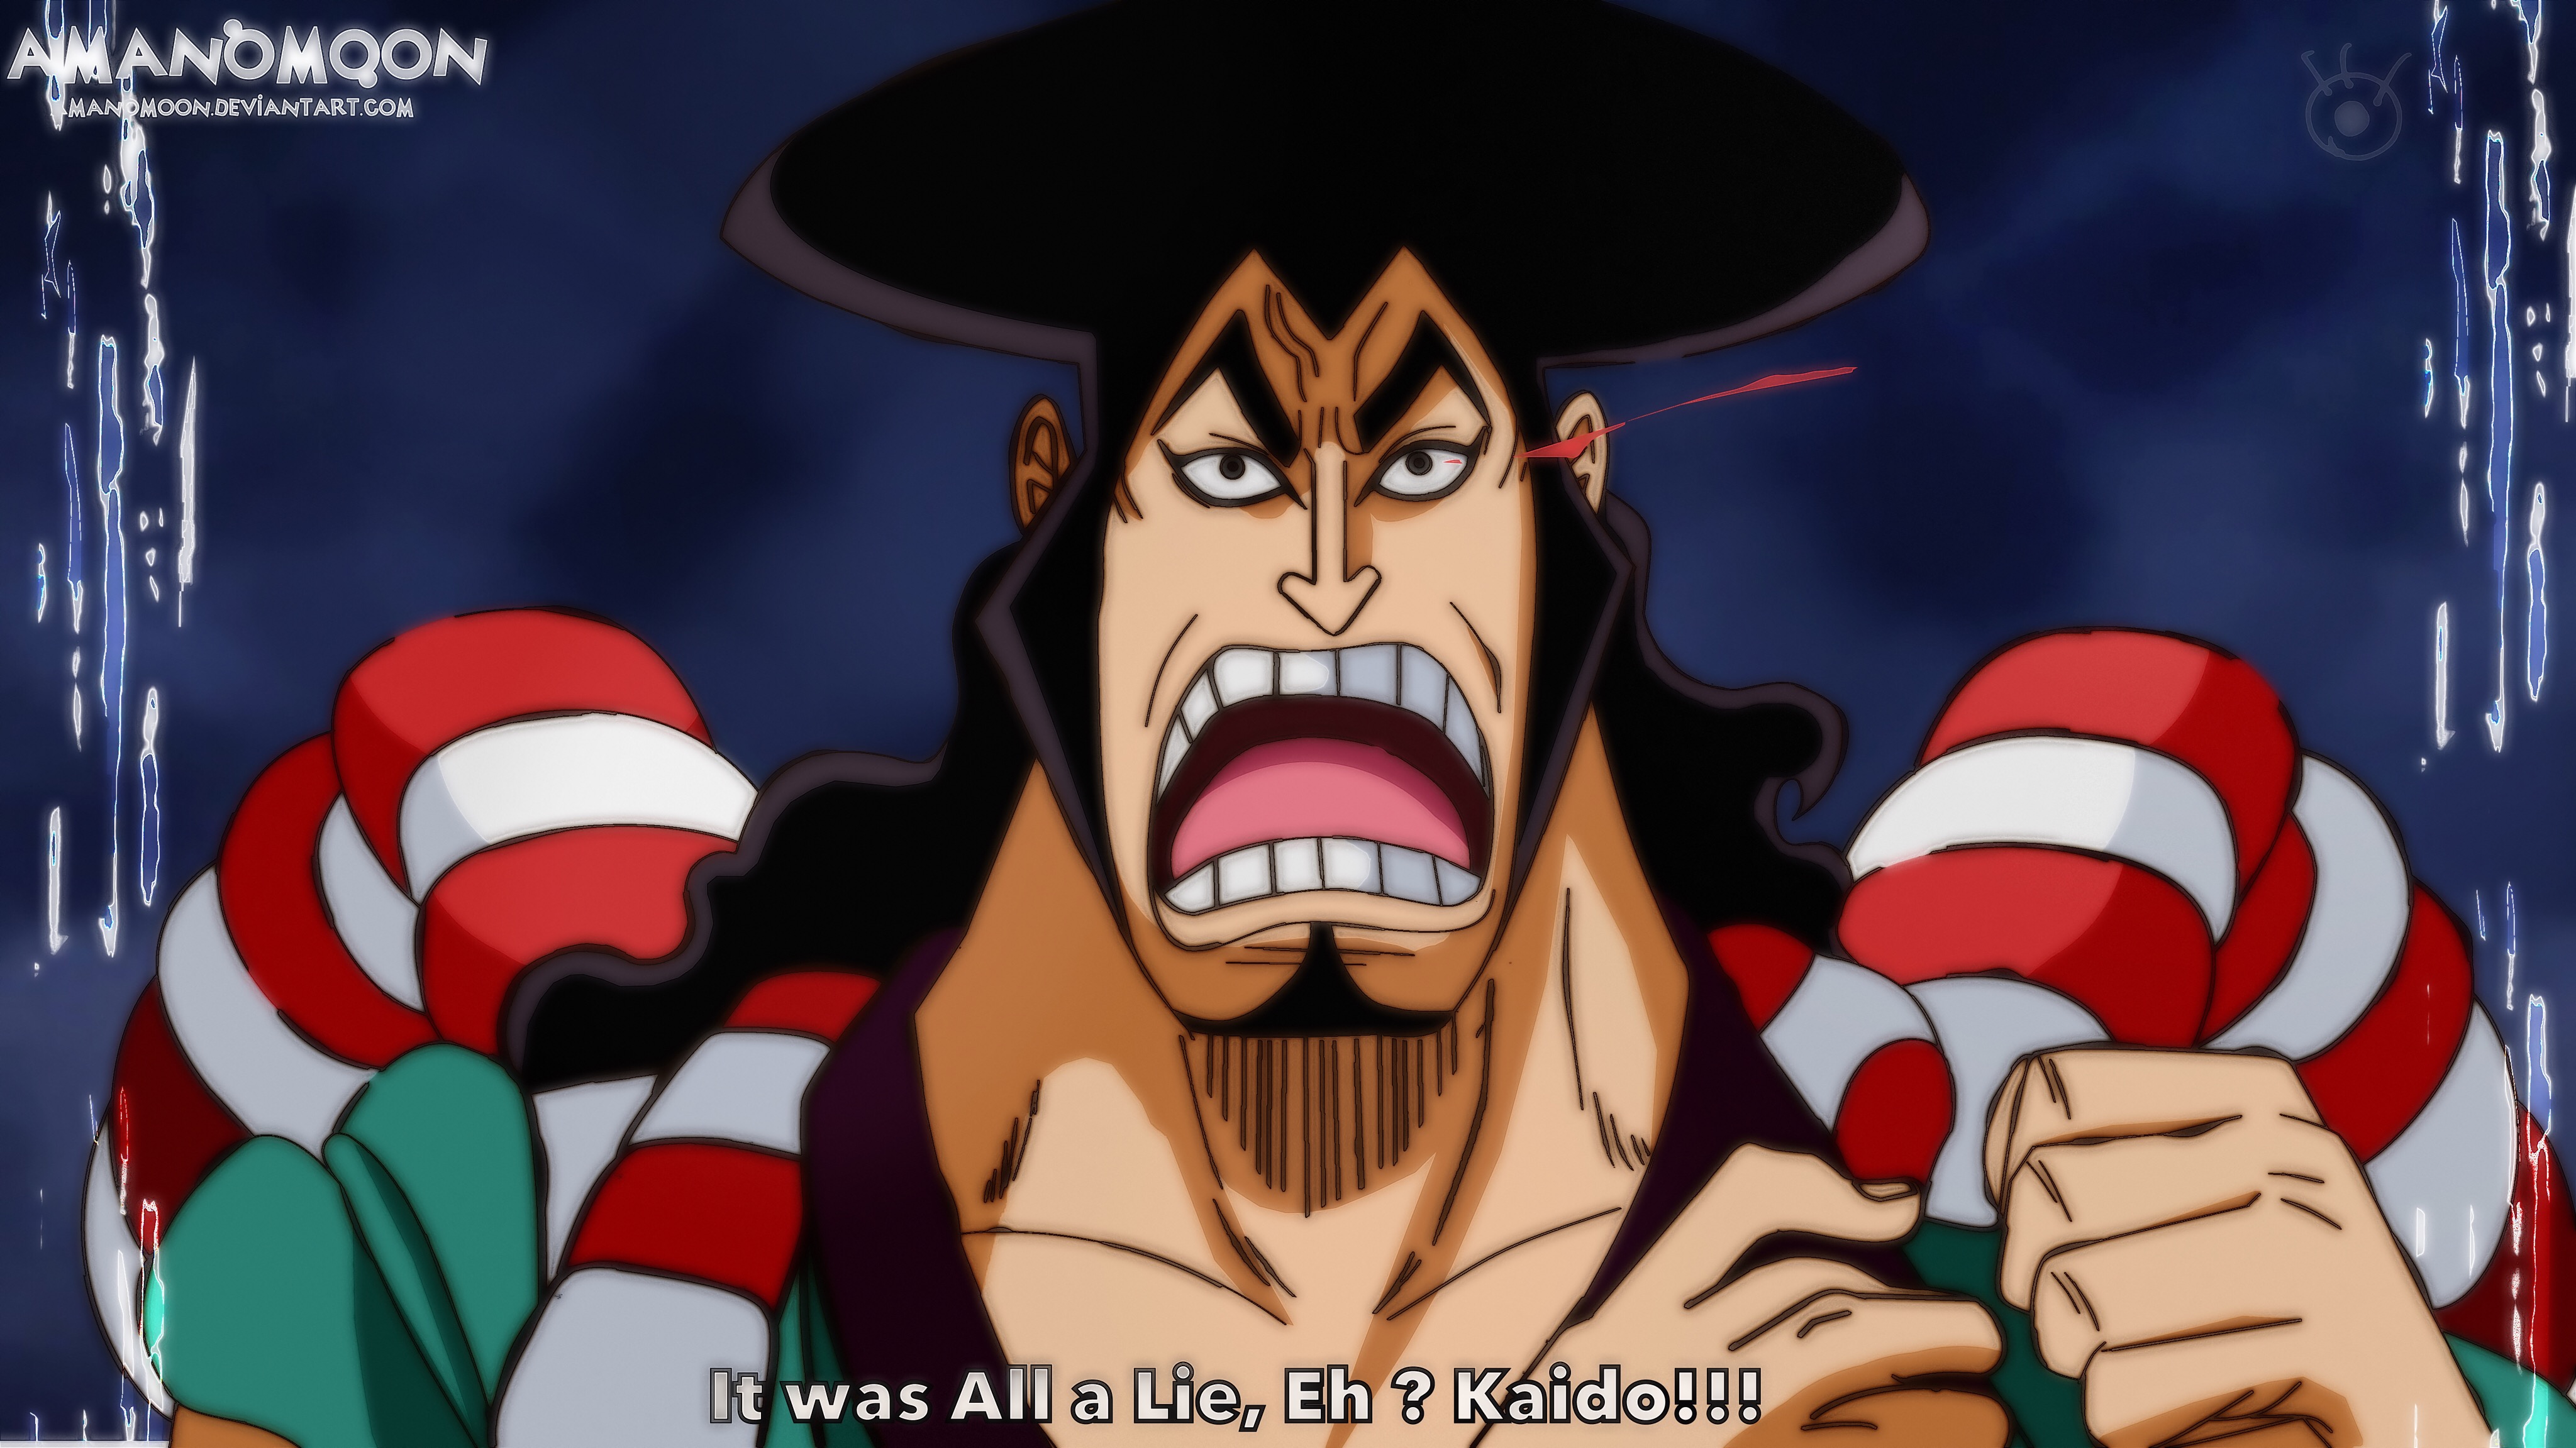 One Piece Chapter 970 Oden Vs Kaido Anime Style By Amanomoon On Deviantart